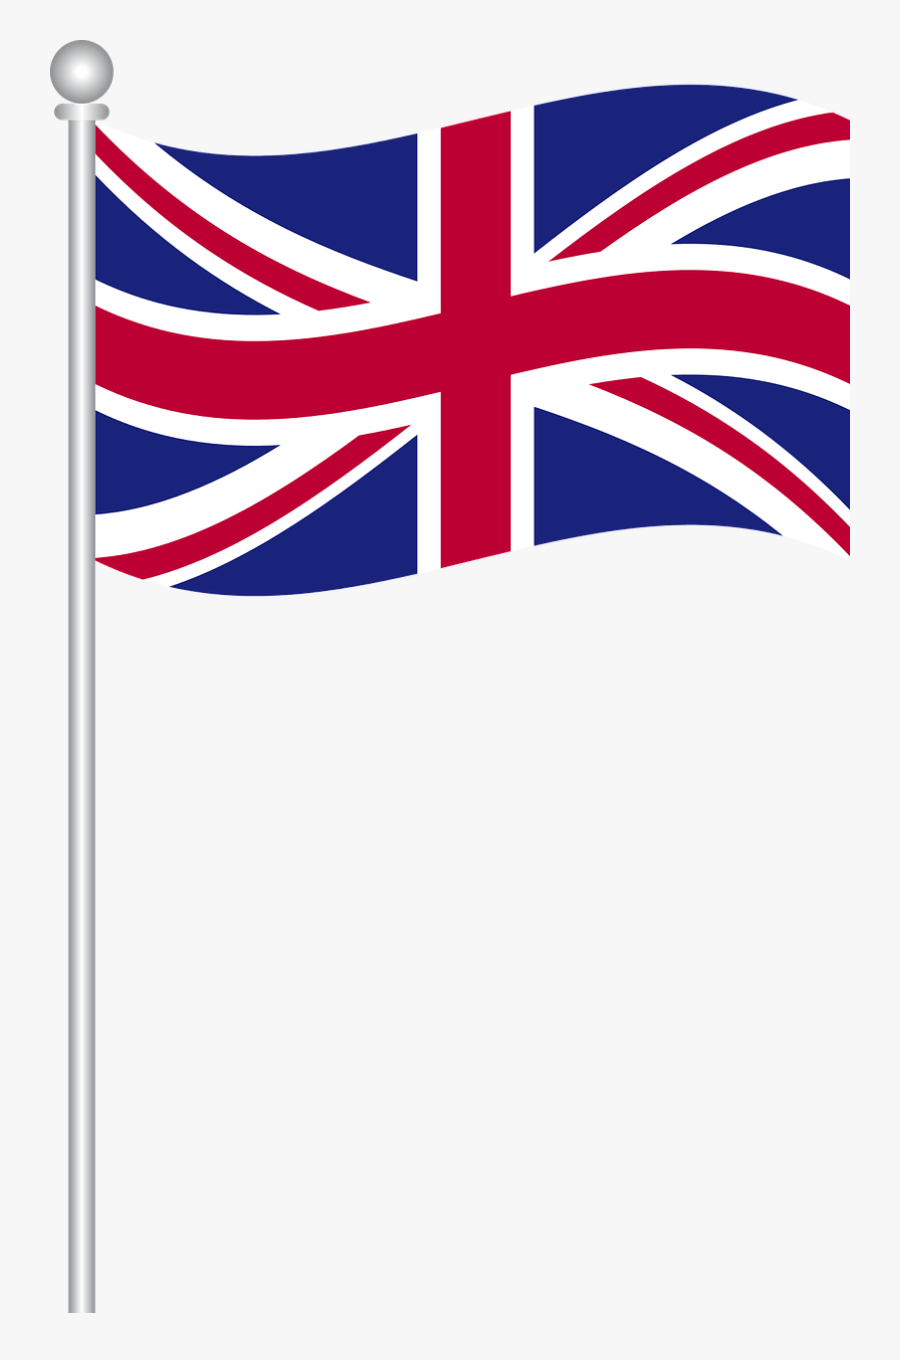 Of World Flags Picpng - Uk Flag, Transparent Clipart